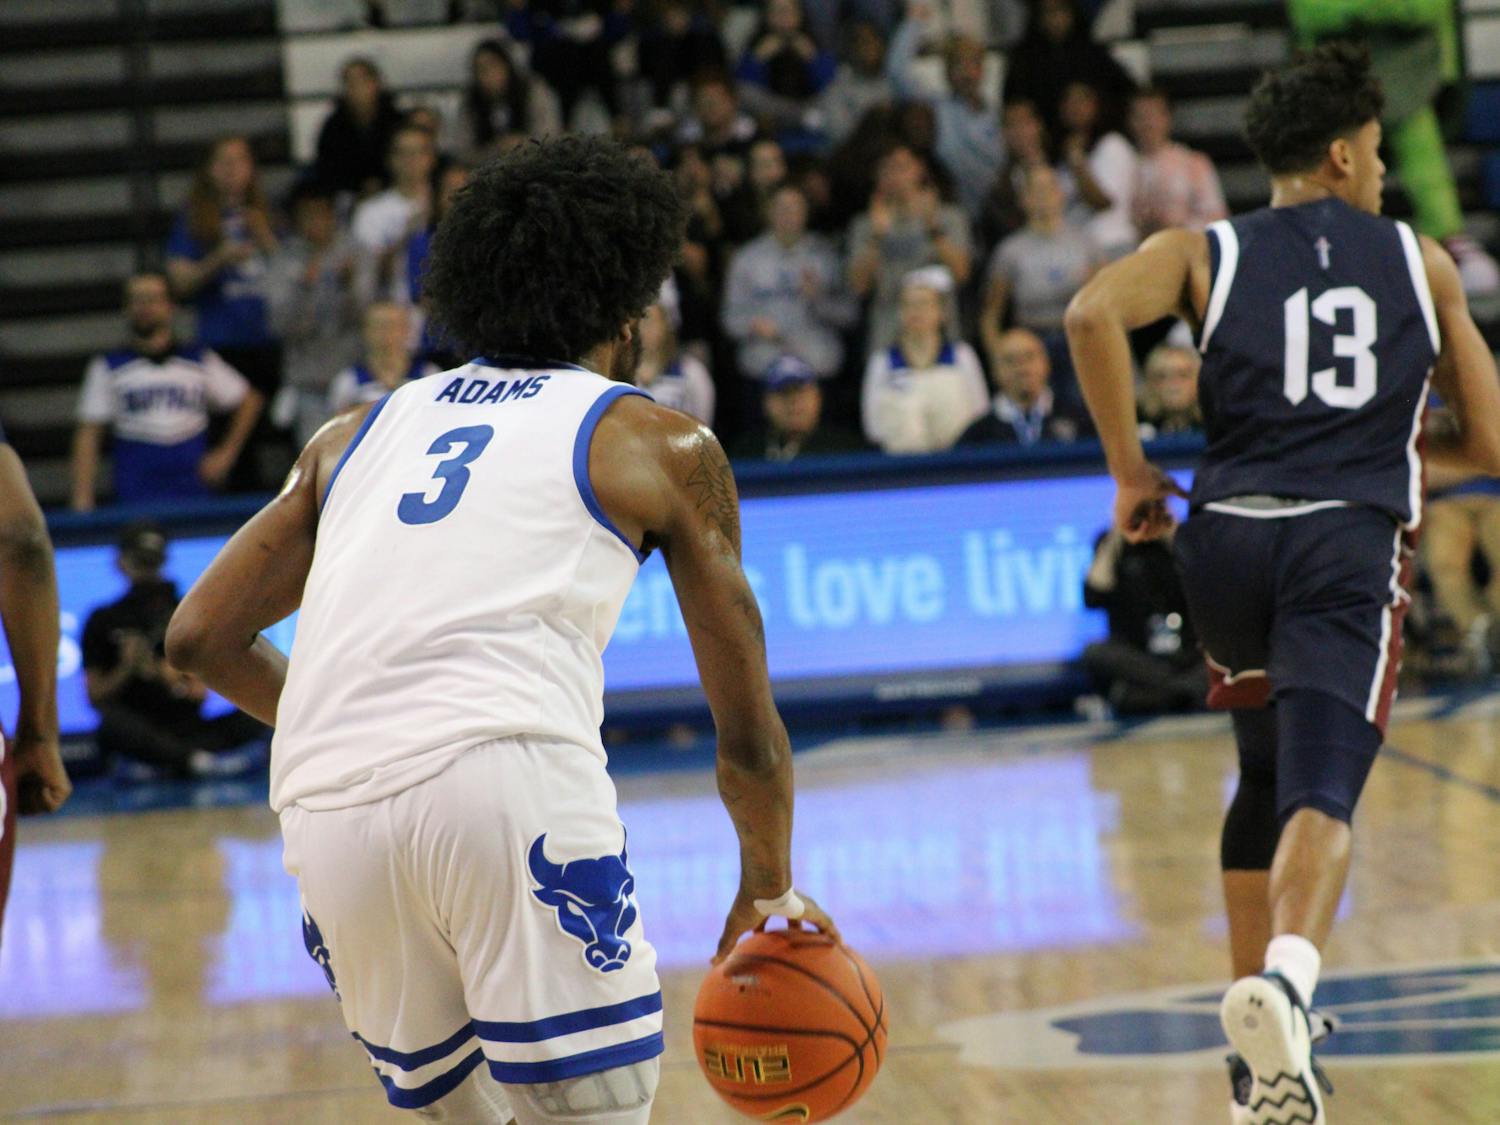 Senior forward Isaiah Adams scored a layup for UB to cut Toledo’s lead to 48-49 in the second half, just before the Bulls collapsed and ultimately lost.&nbsp;